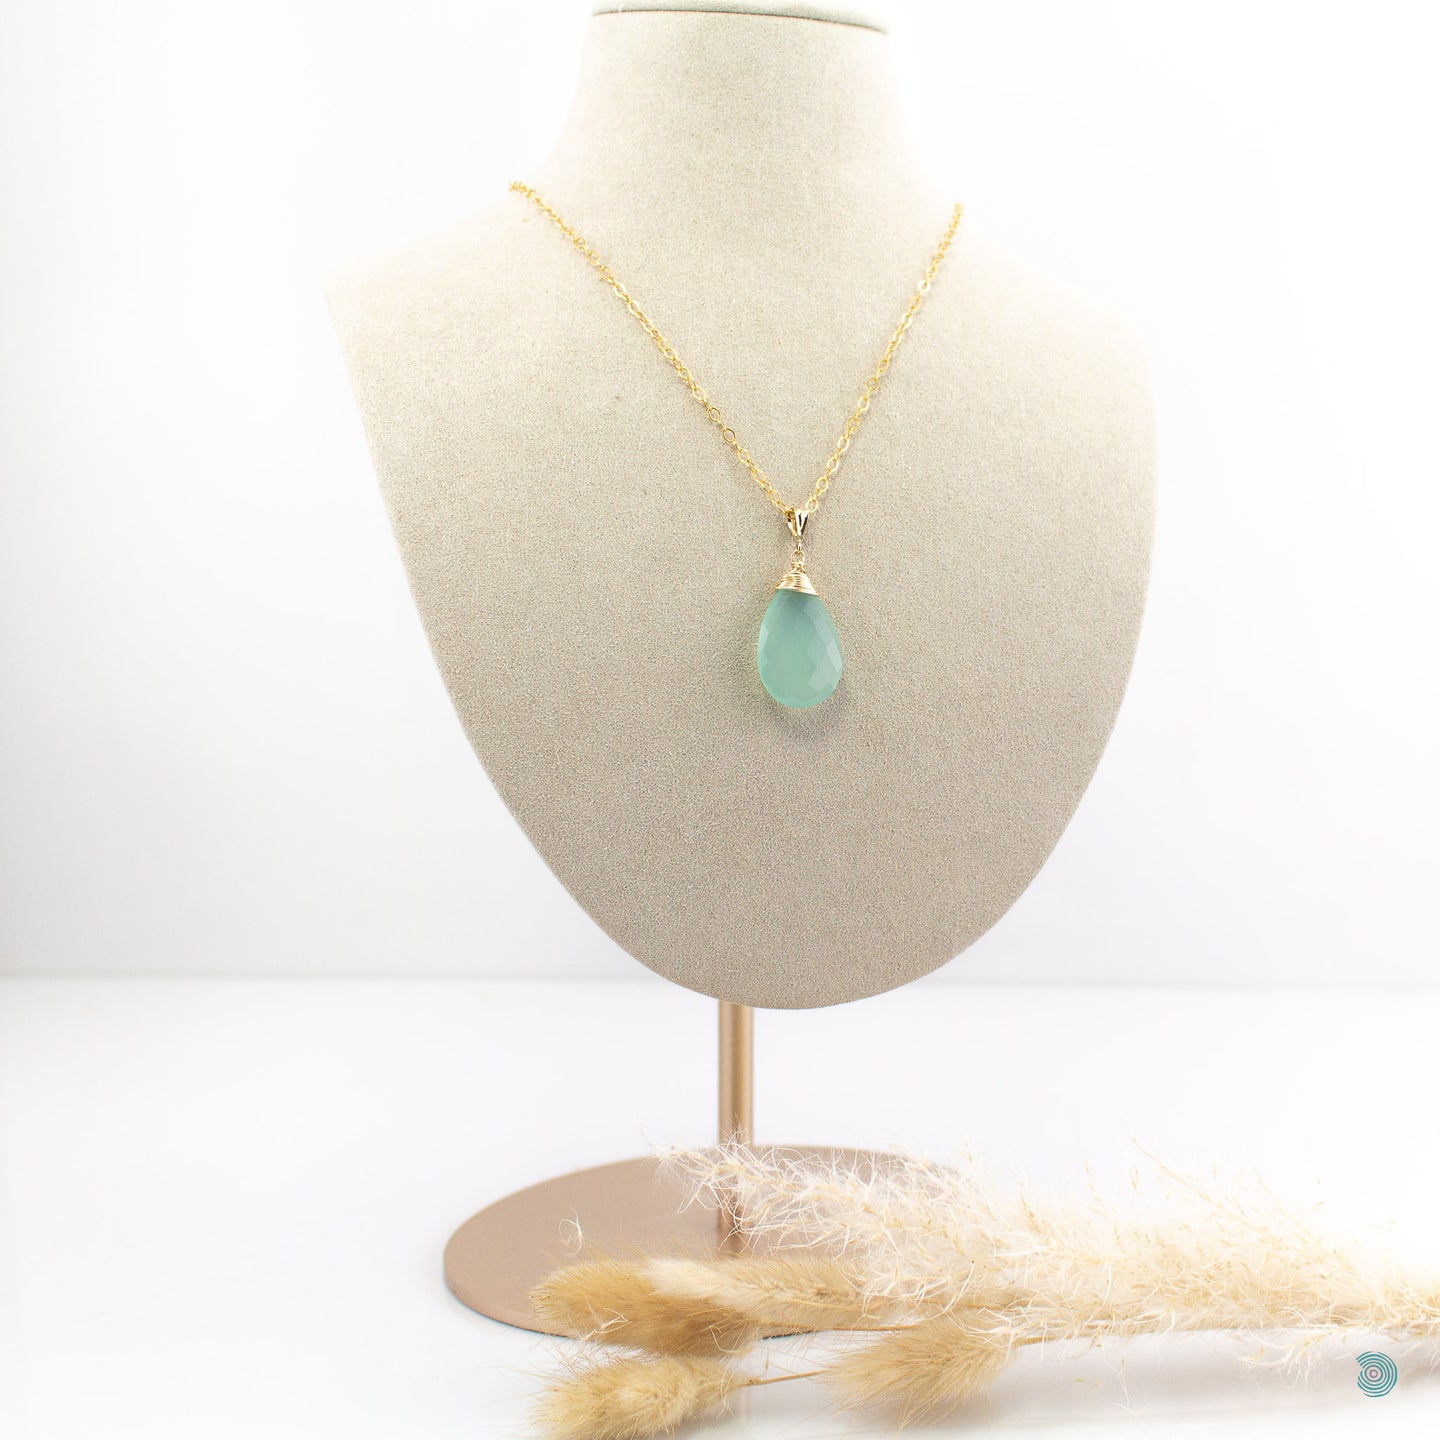 Faceted blue chalcedony teardrop pendant on a 14k gold filled chain, 18 inches in length with a 2 inch extension chain for adjustment